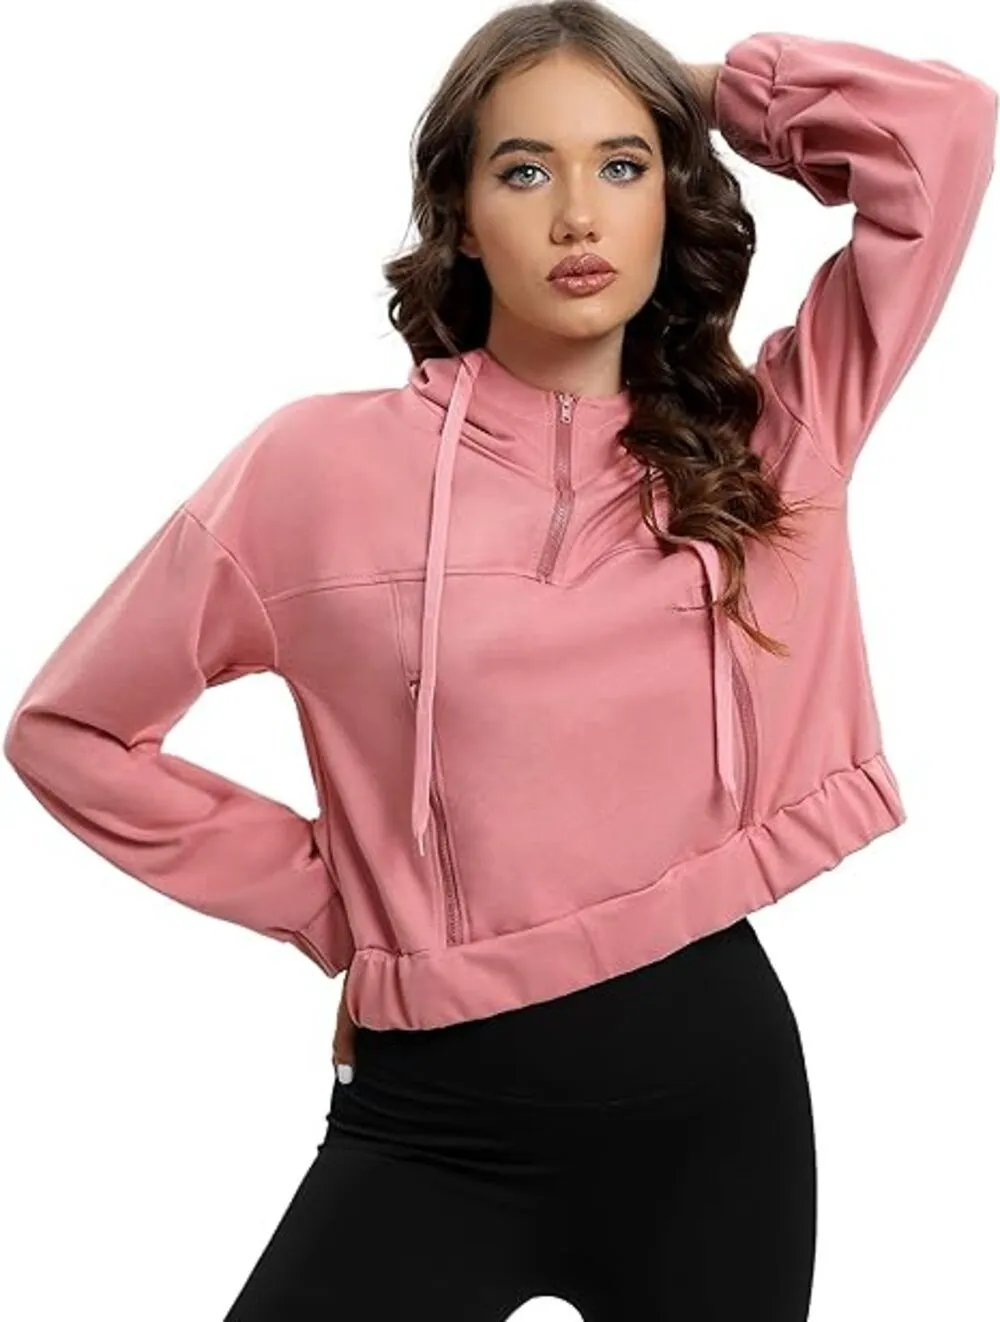 Womens Half Zip Cropped Hoodies Quarter Zip Up Pullover Sweatshirts Casual Fall Clothes Outfits Sweater for Women